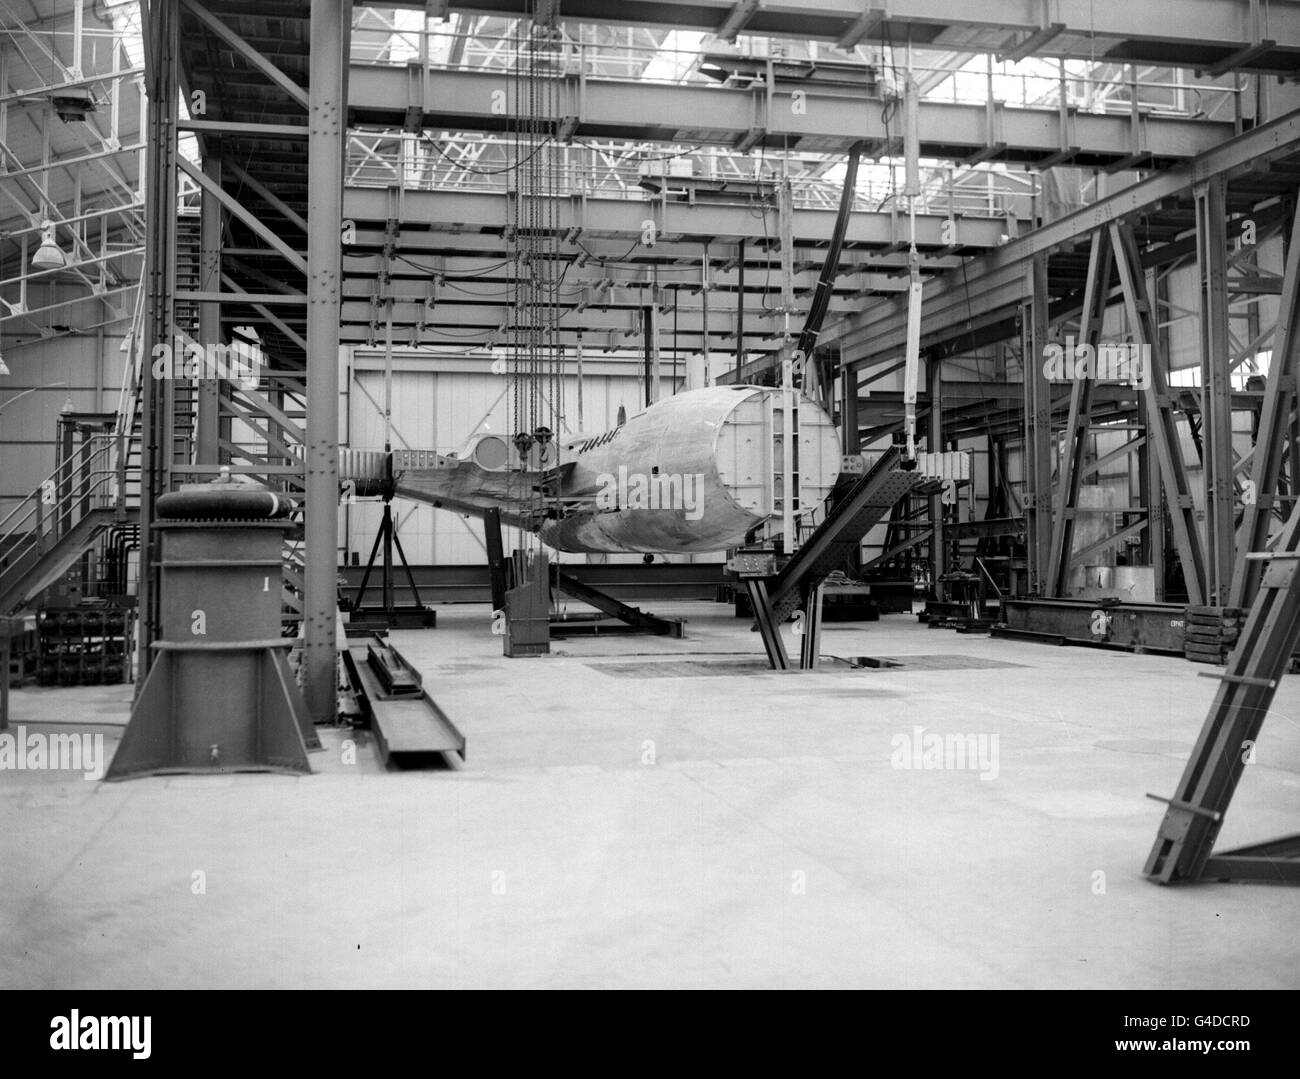 PA NEWS PHOTO 21/7/53  FUSELAGE OF A CRESCENT-WING VICTOR JET BOMBER IS TESTED IN THE NEW STRUCTURAL TEST FRAME  AT RADLETT, HERTFORDSHIRE Stock Photo